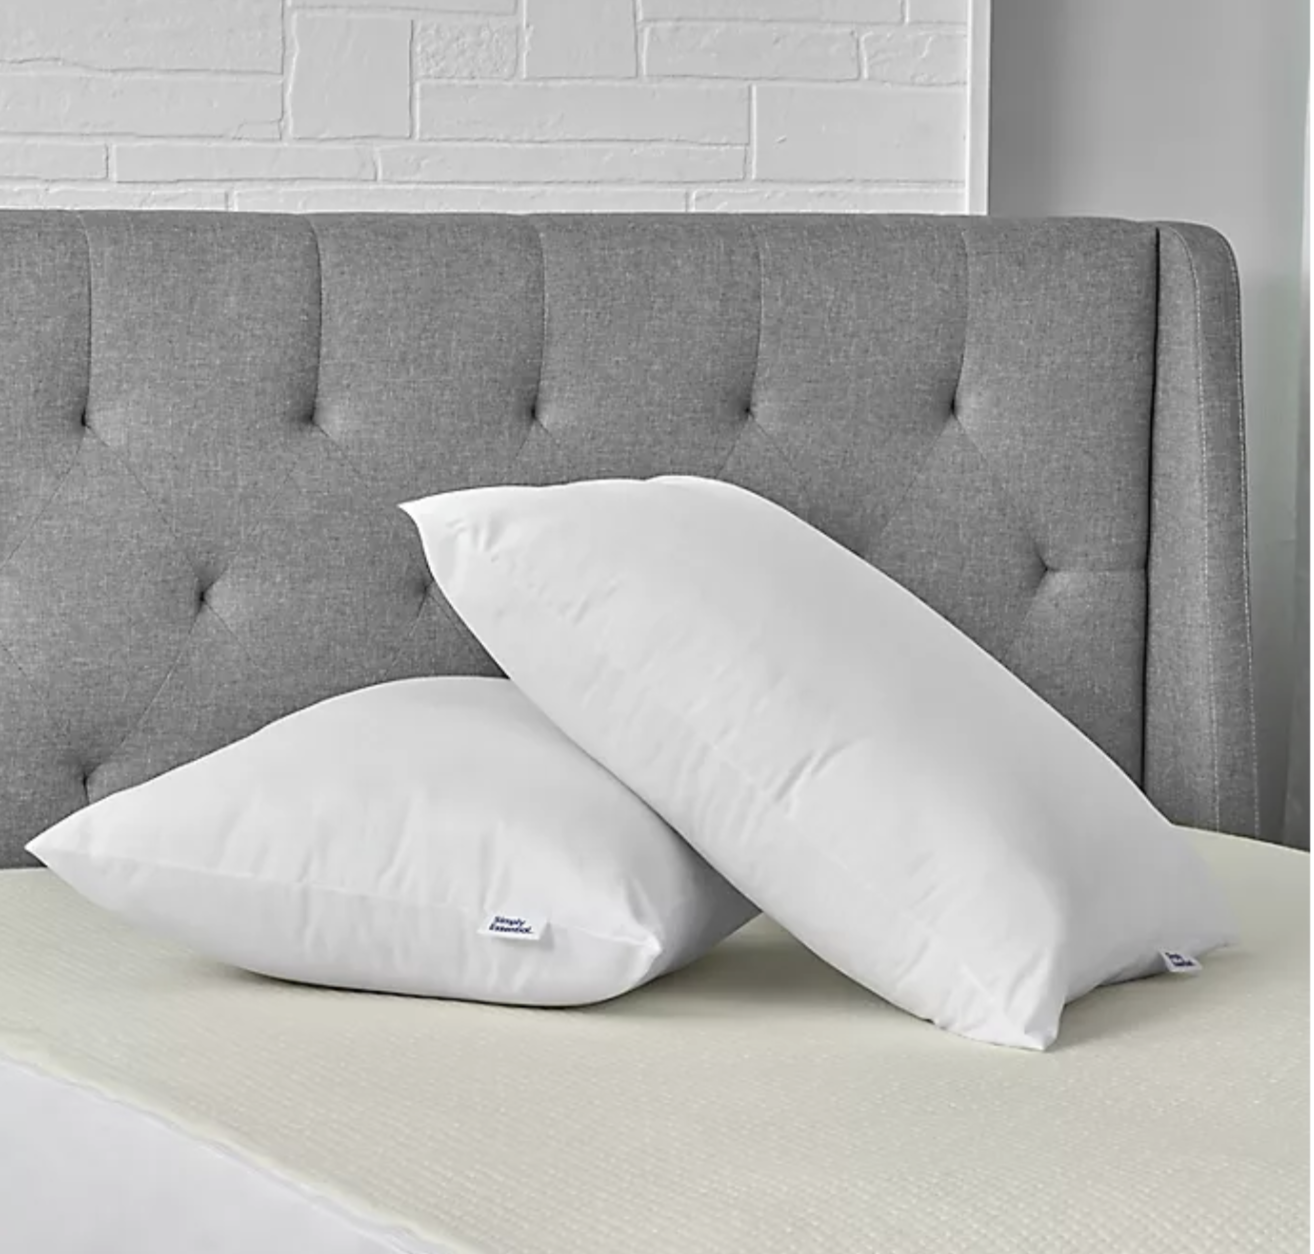 Two white microfiber pillows on a bed 